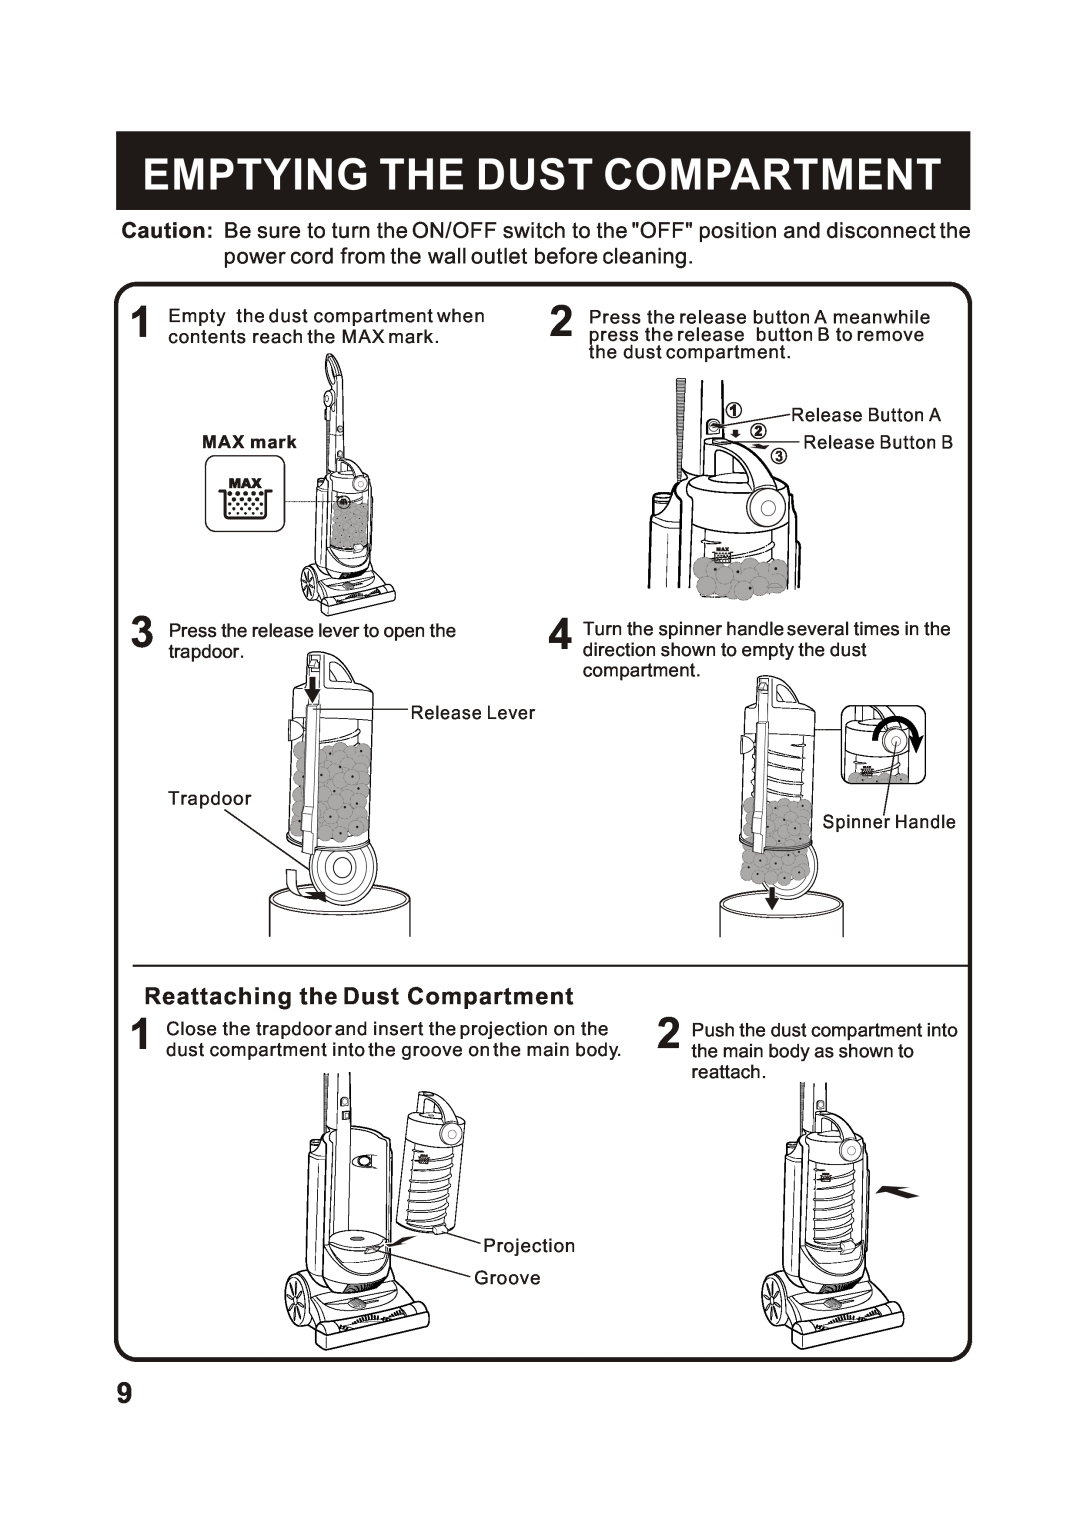 Fantom Vacuum FM760 instruction manual Emptying The Dust Compartment, power cord from the wall outlet before cleaning 